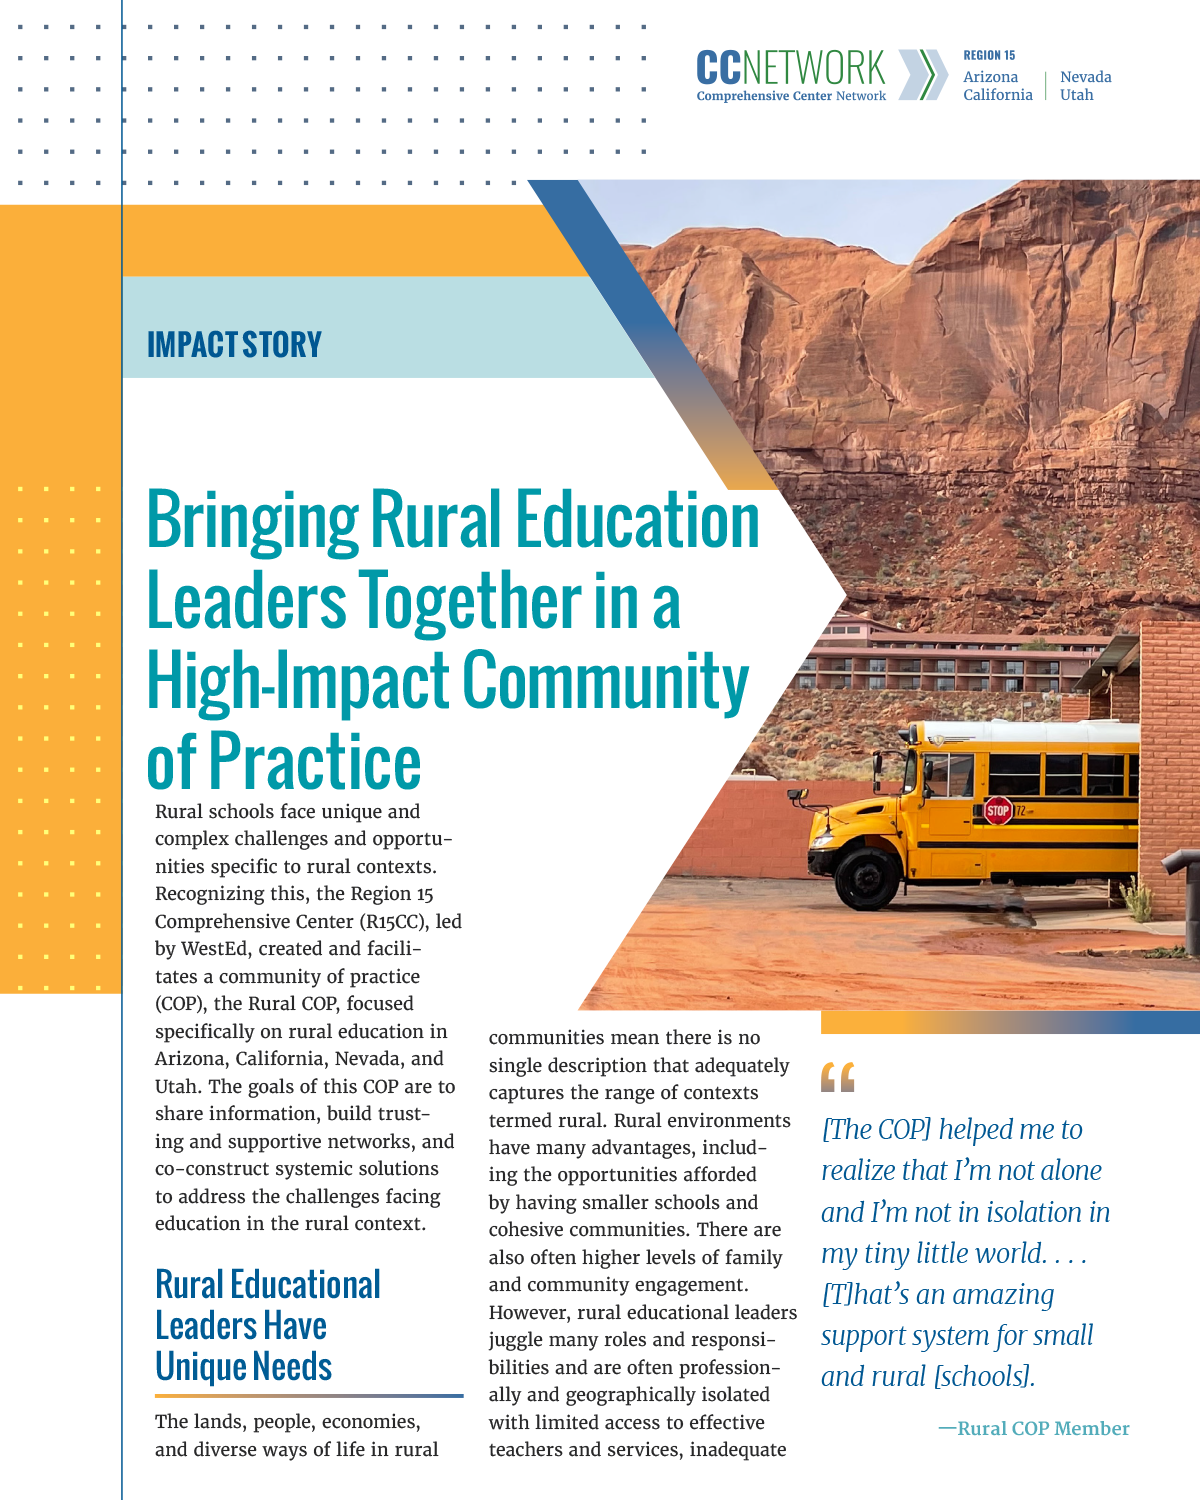 Bringing Rural Education Leaders Together in a High-Impact Community of Practice